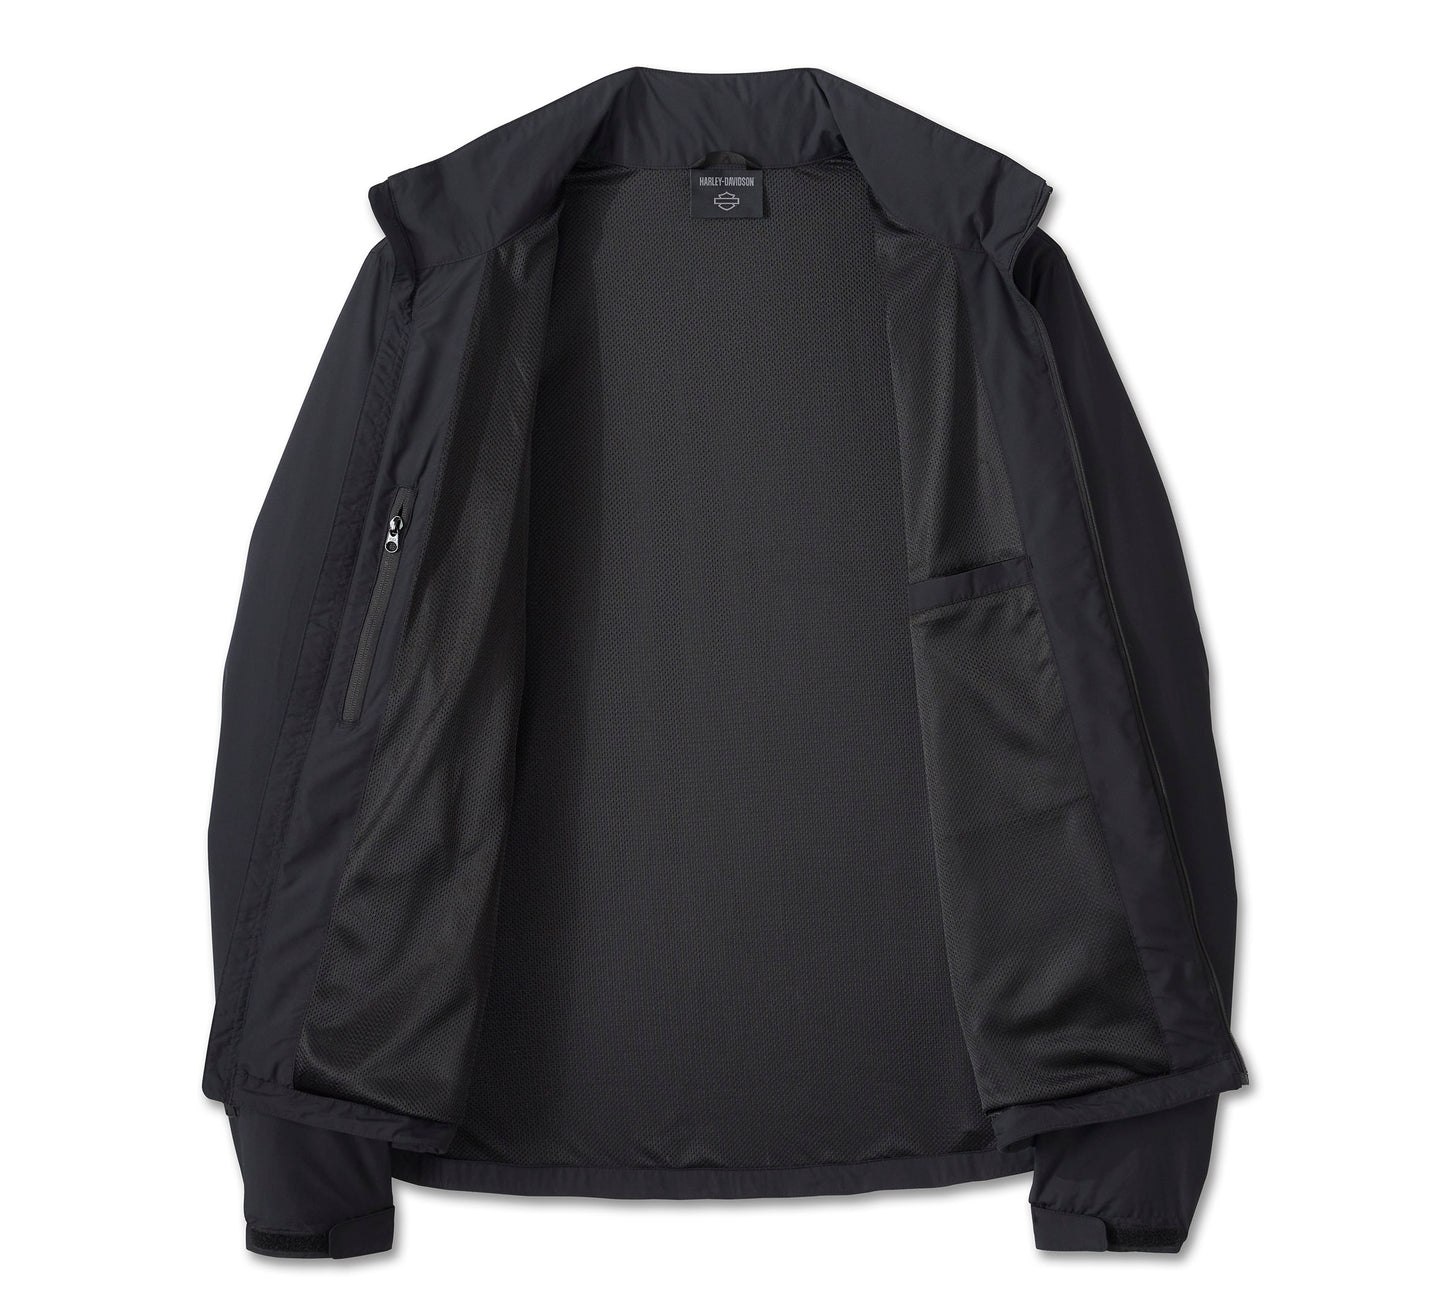 Men's H-D Flex Layering System Hooded Mid Layer